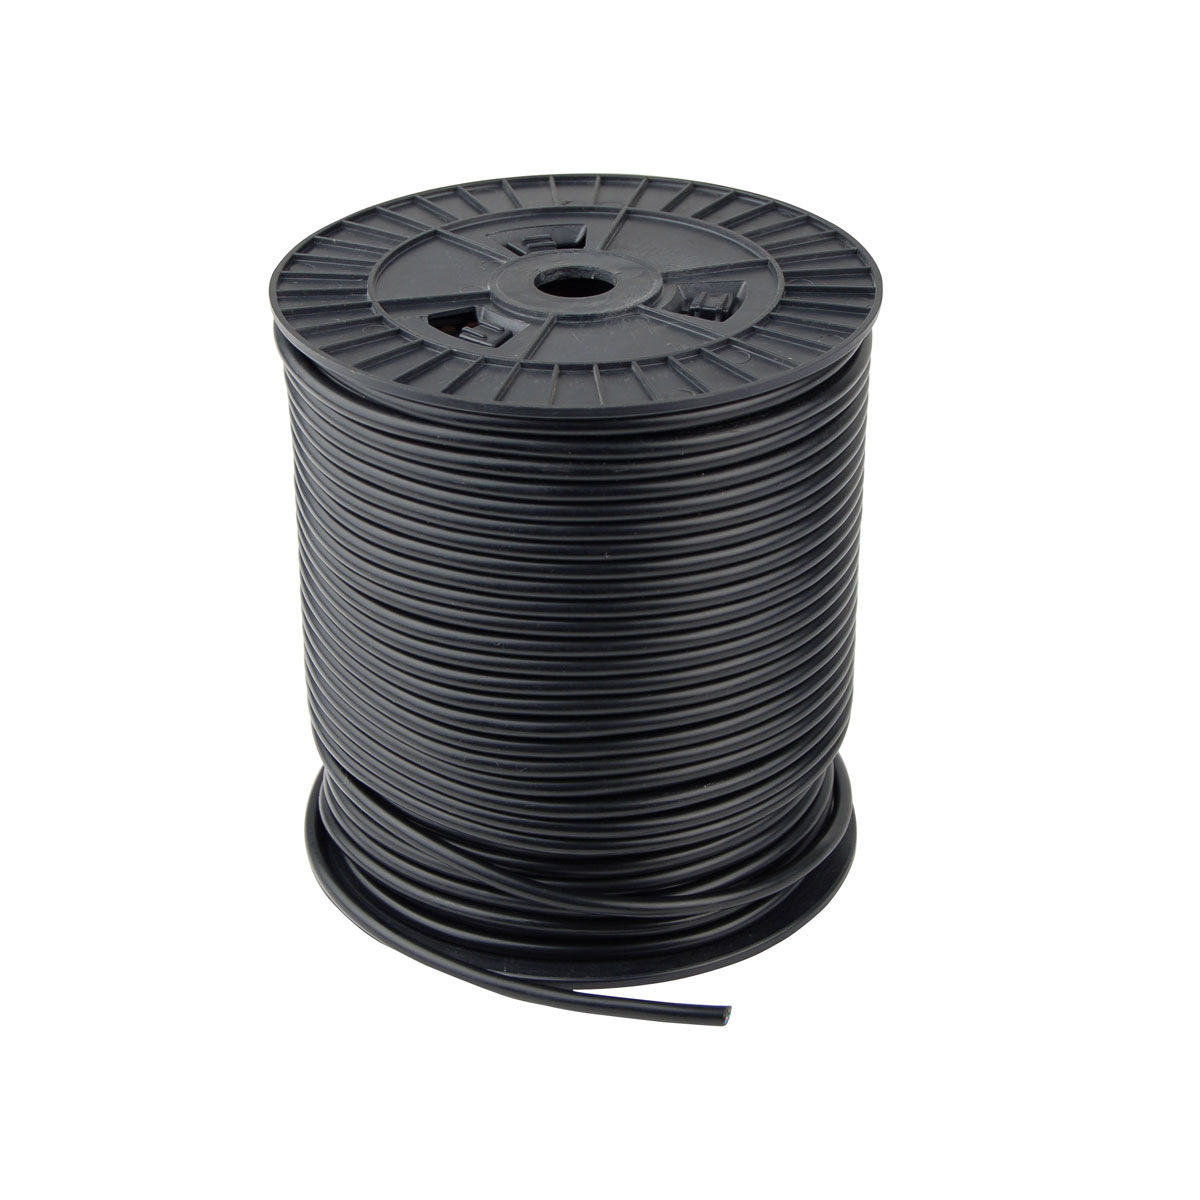 Cable 5 x 0.5 mm- - 50m roll  Black